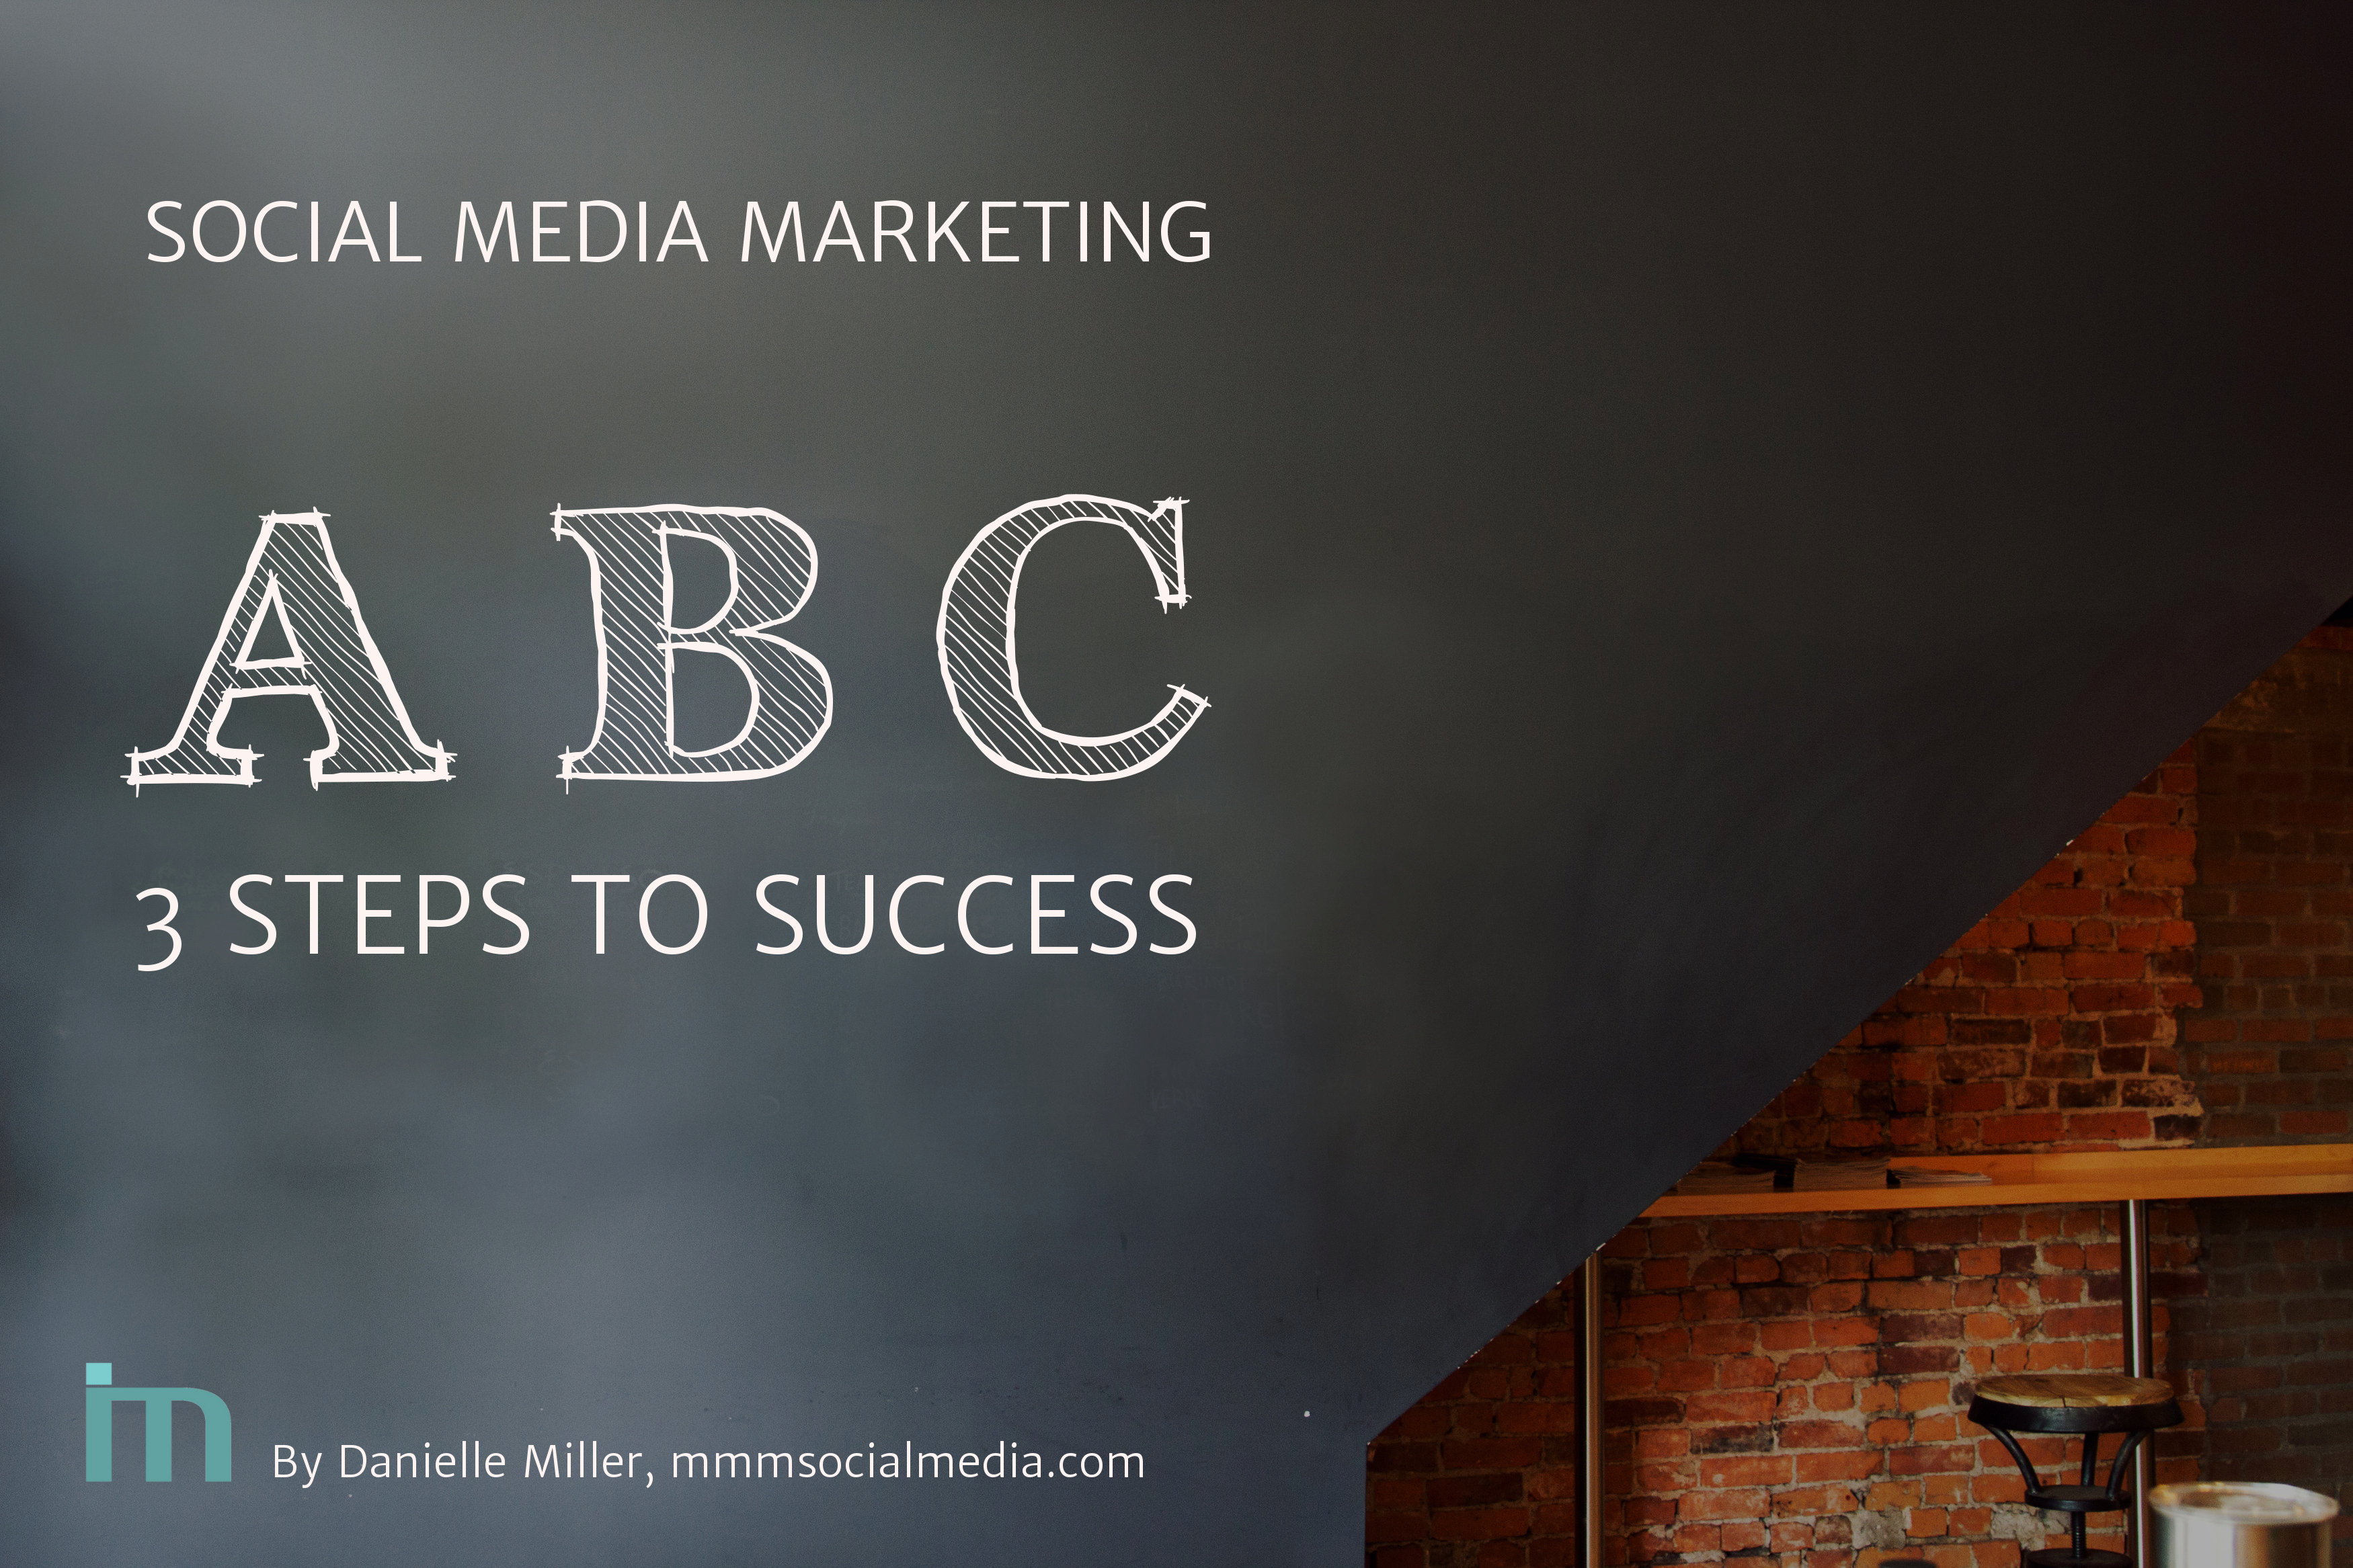 Part II: The 3-step process that makes Social Marketing as easy as ABC